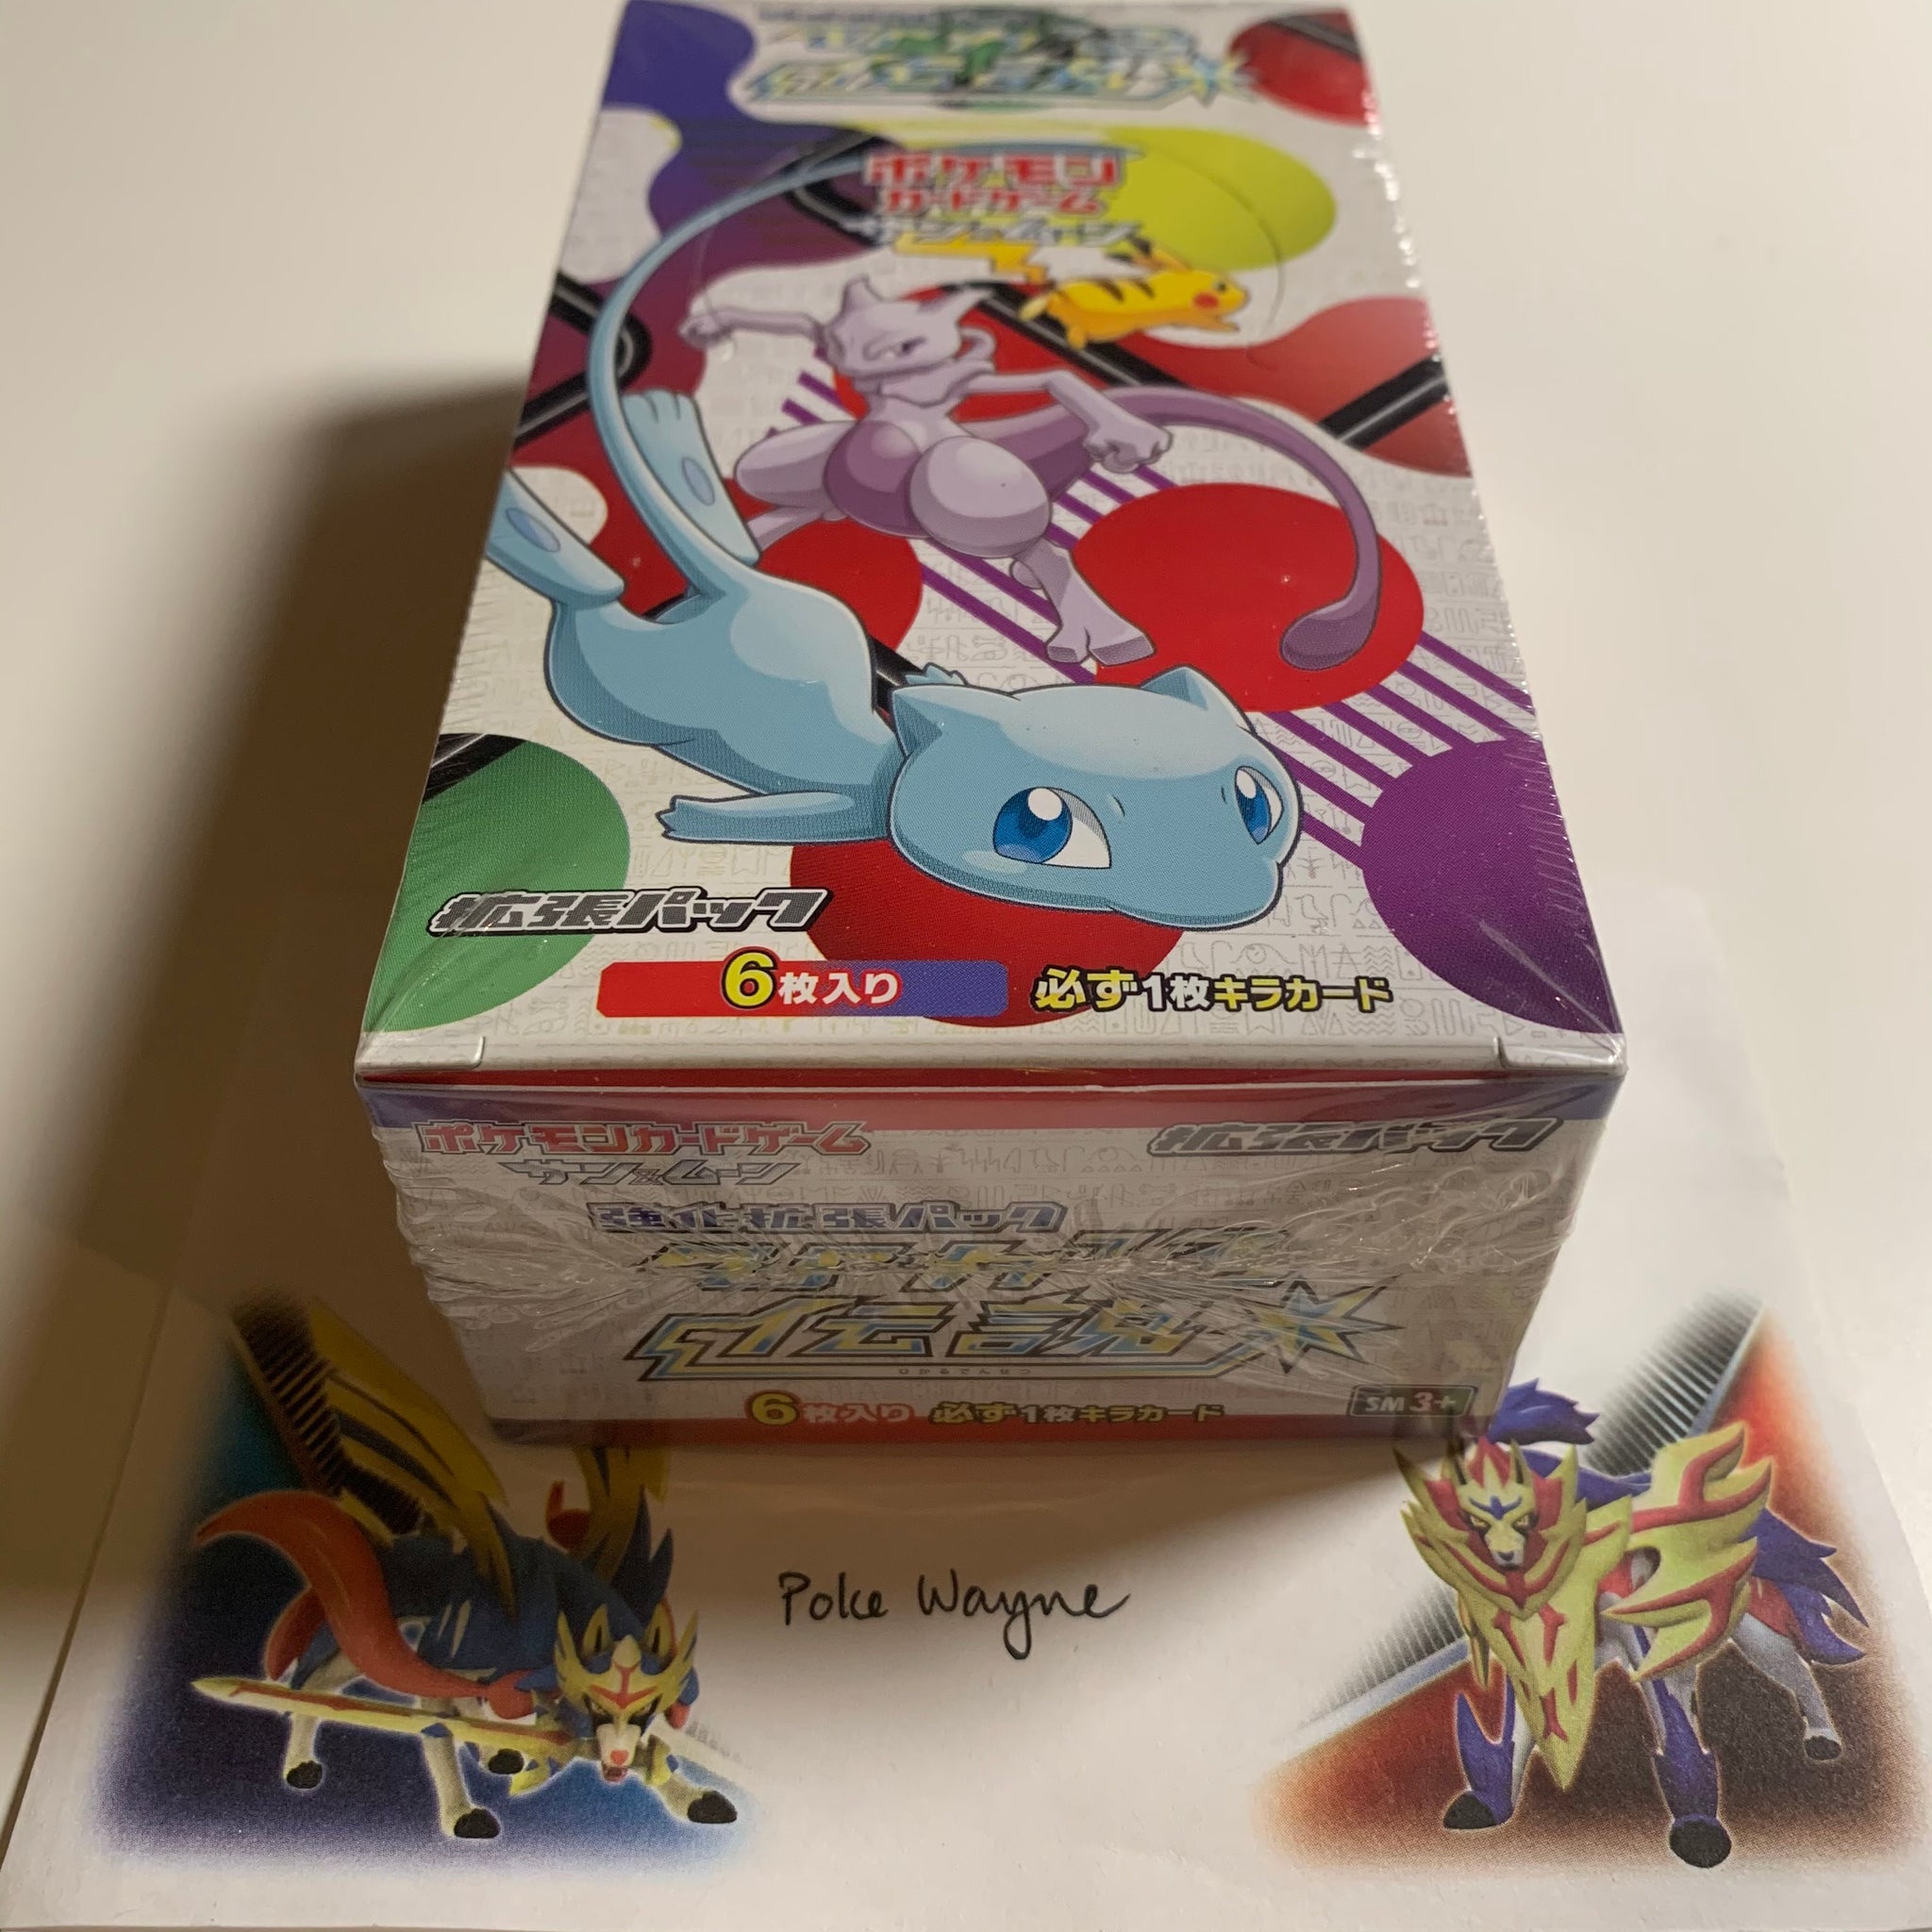 Auction Item 312800927798 TCG Cards 2017 Pokemon Japanese Sun & Moon  Strength Expansion Pack Shining Legends